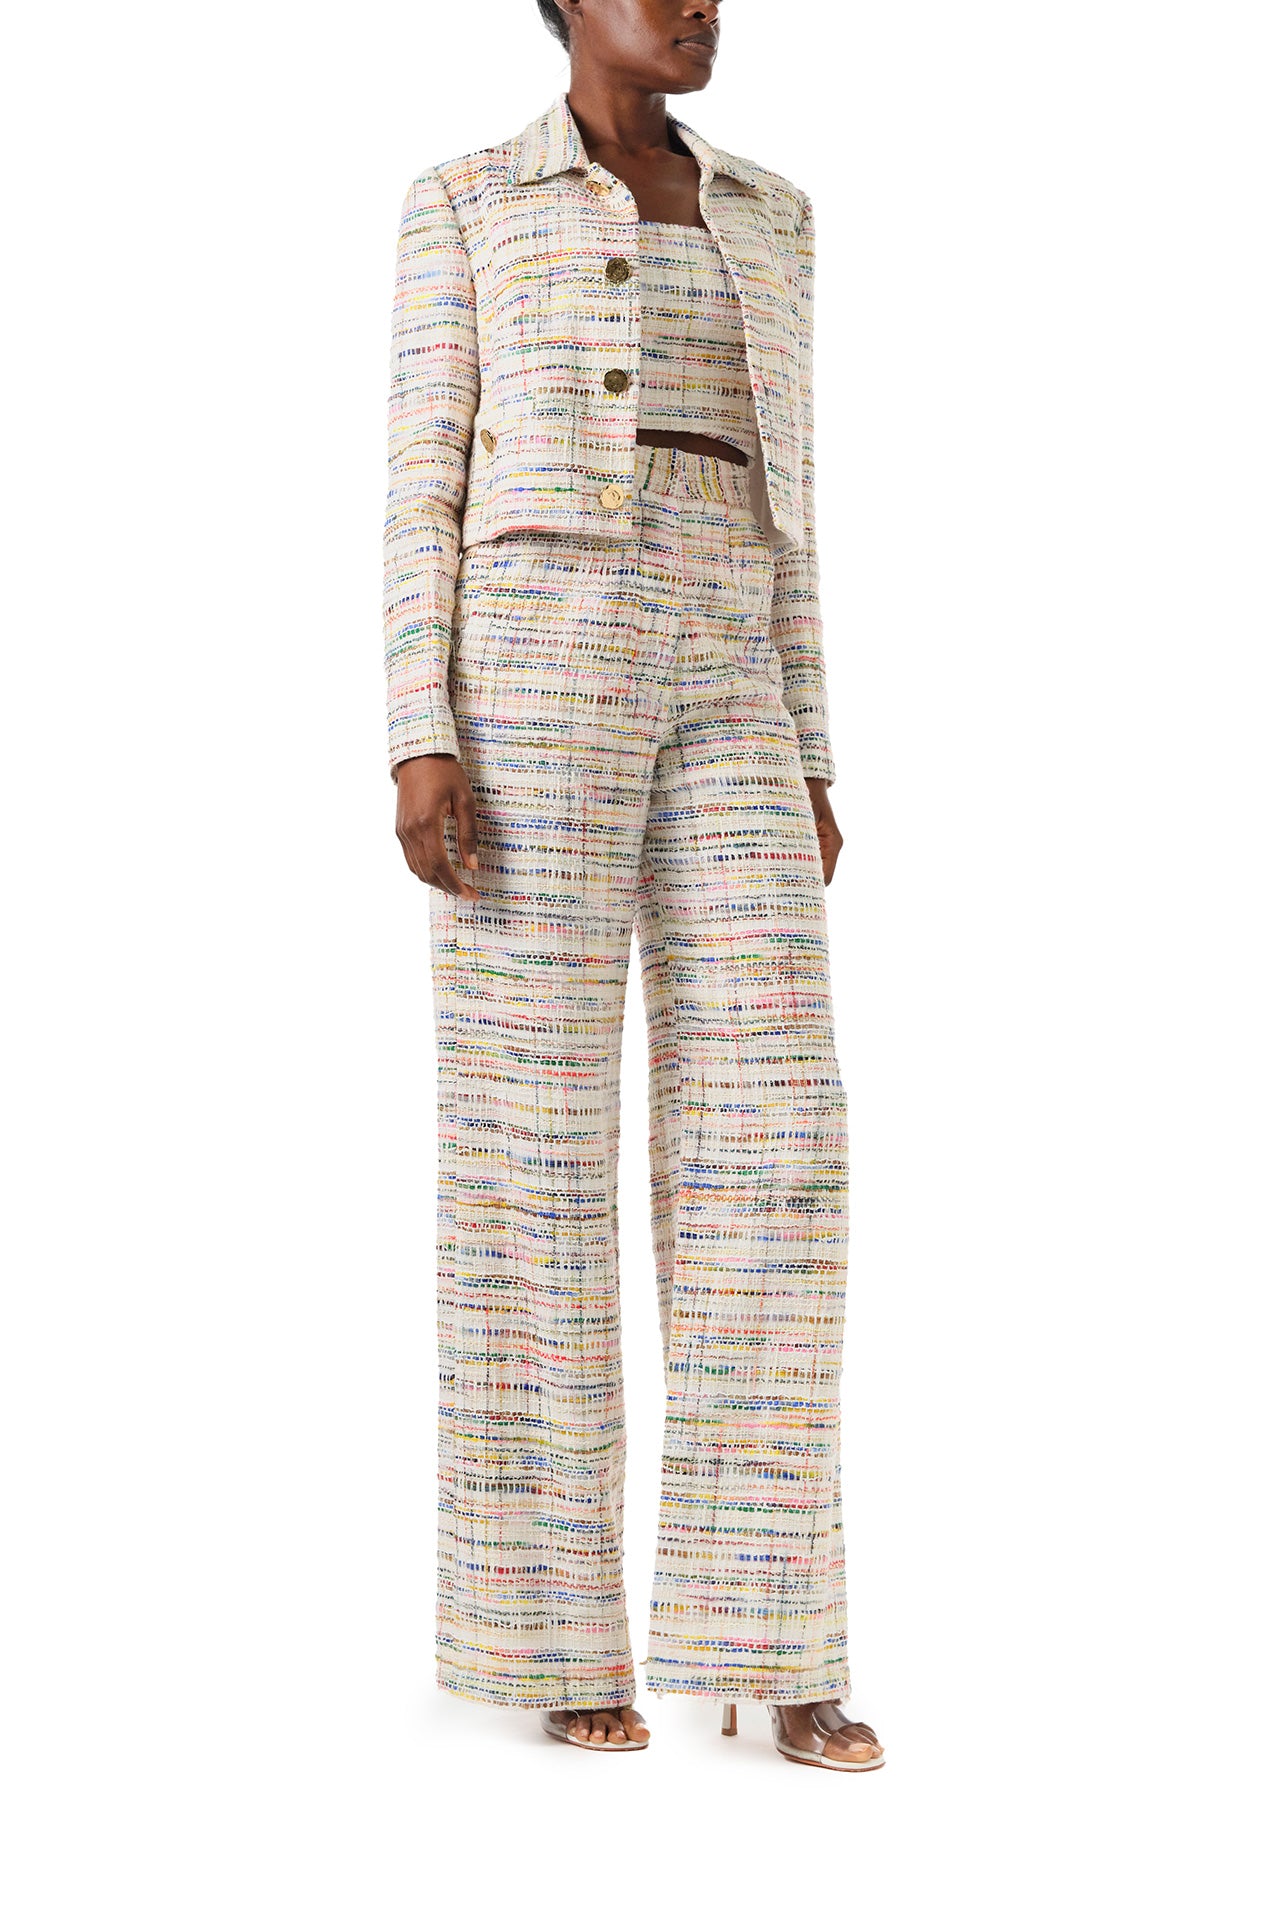 Monique Lhuillier Spring 2024 silk white multi colored tweed cropped jacket shown with high waisted trousers - front.